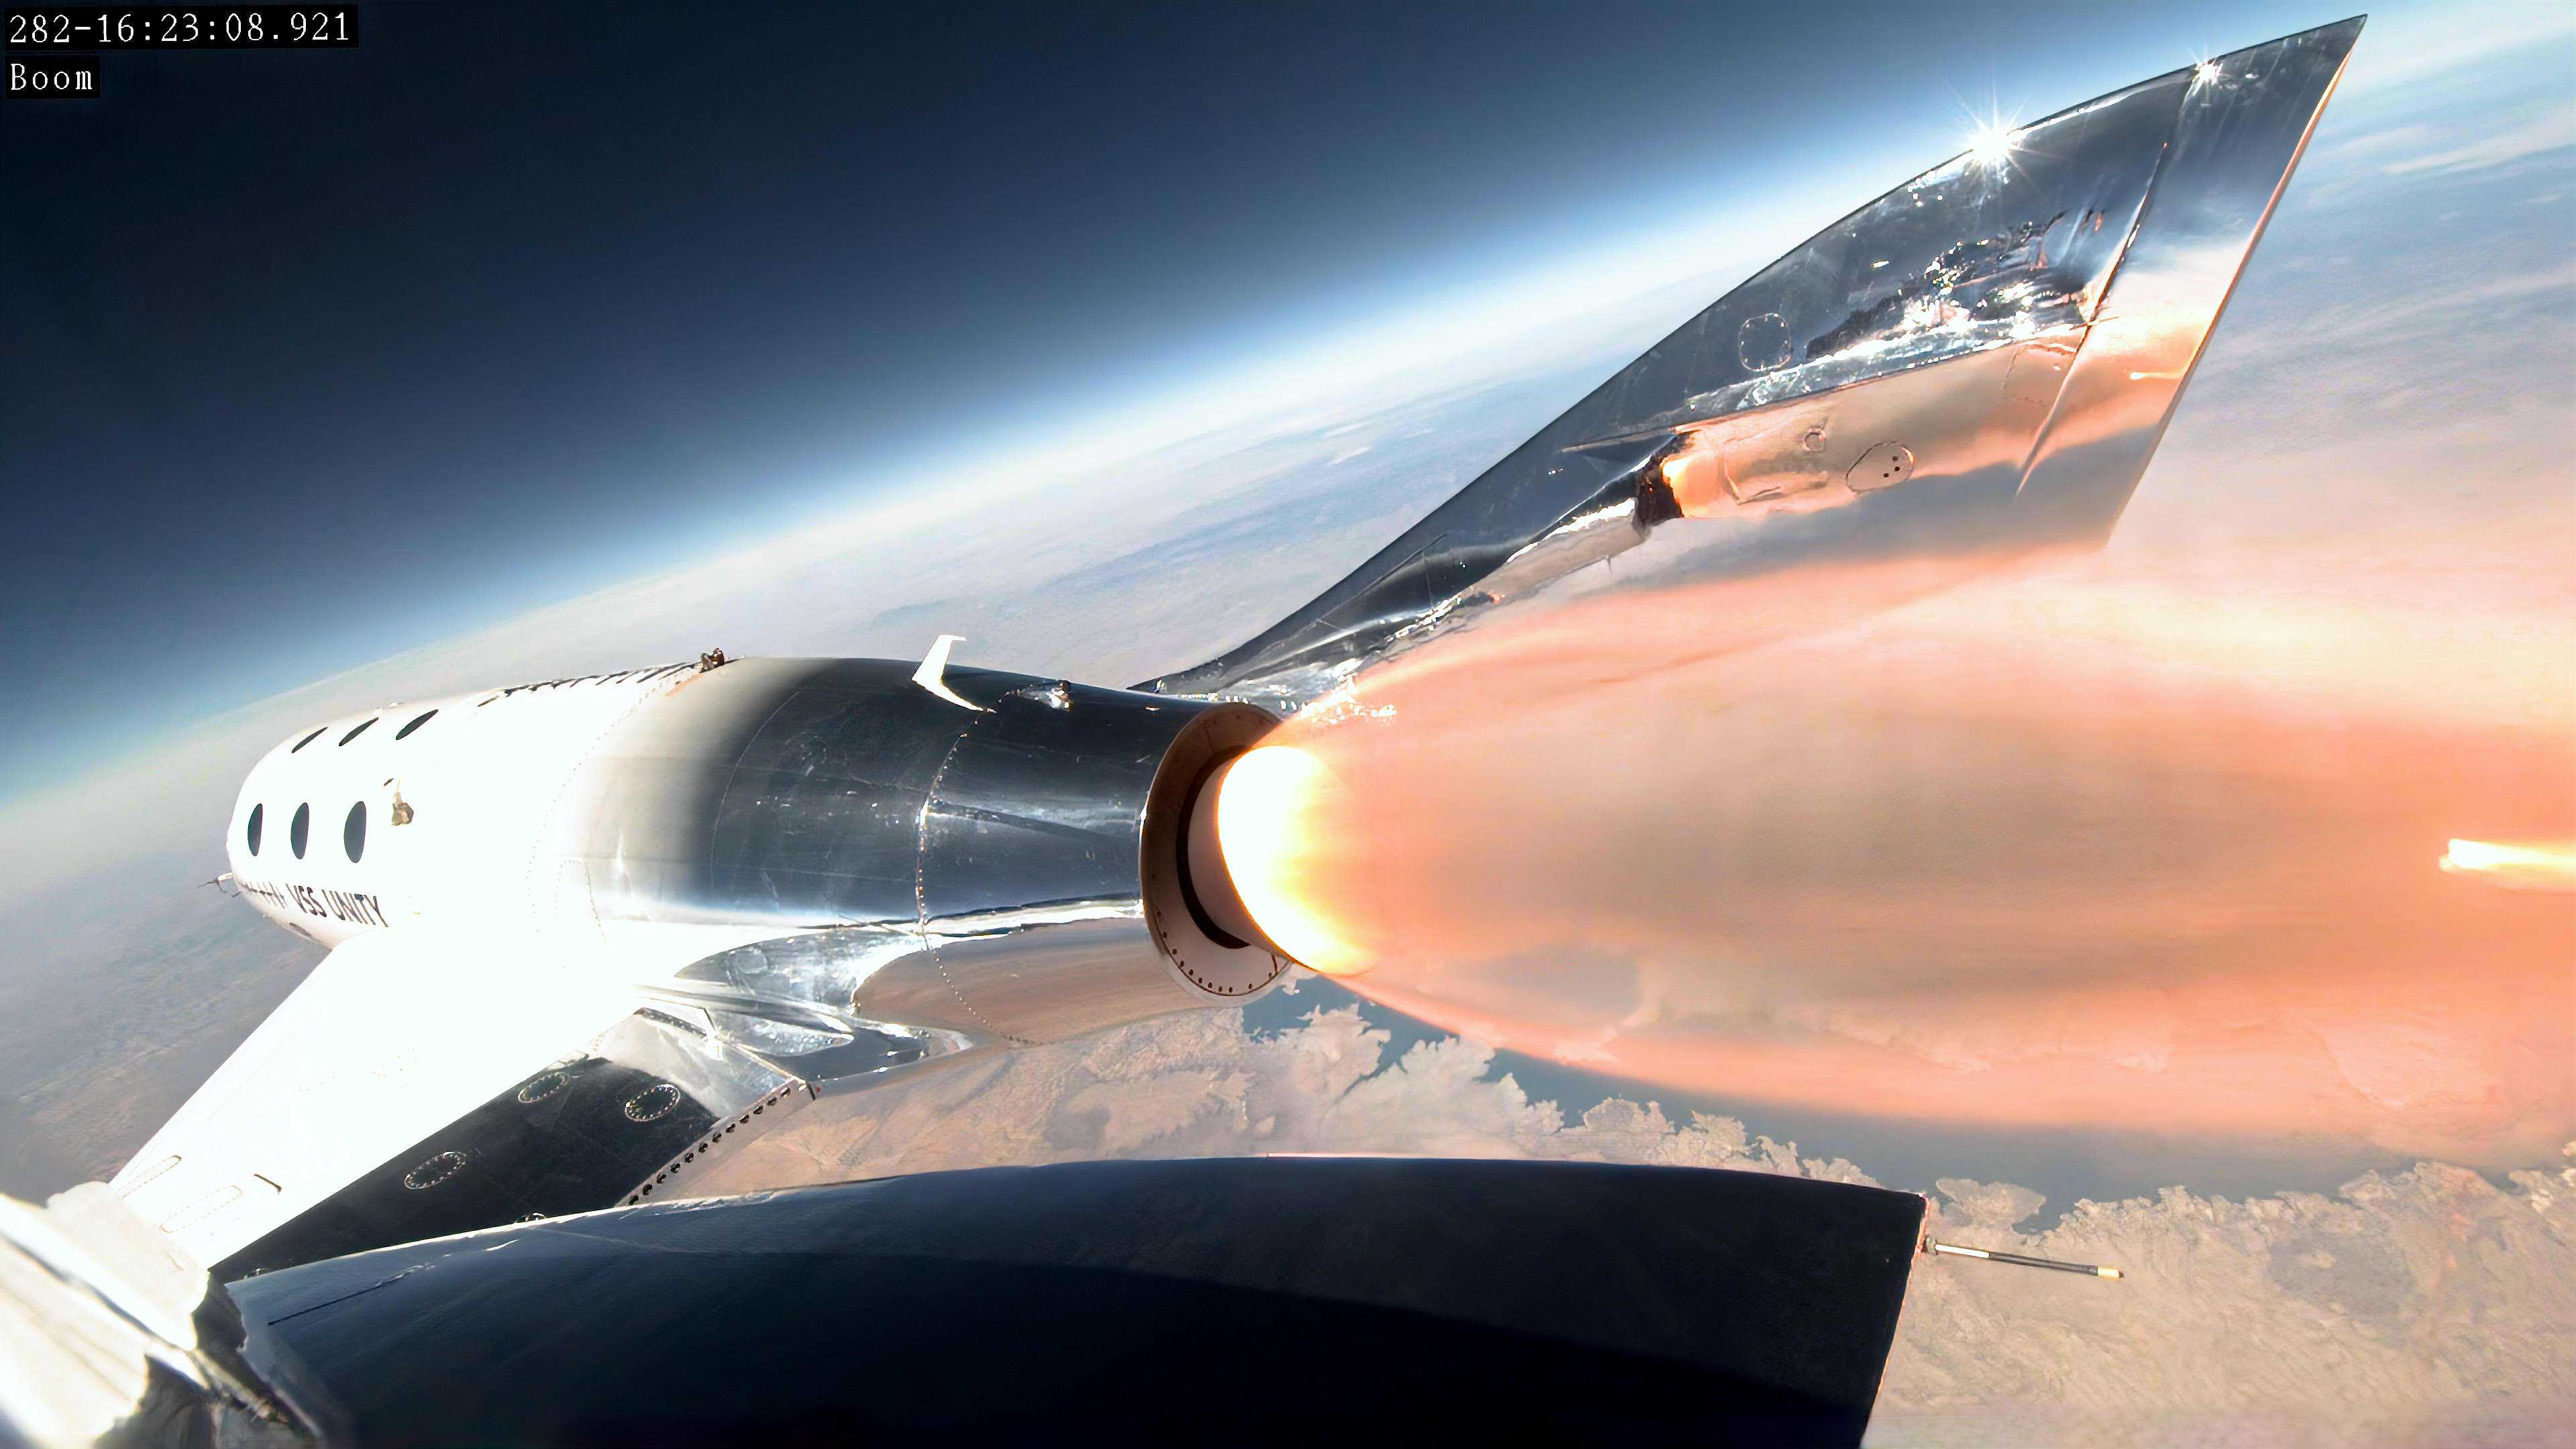 Investing in Space: Virgin Galactic still has a big hurdle to clear for commercial service